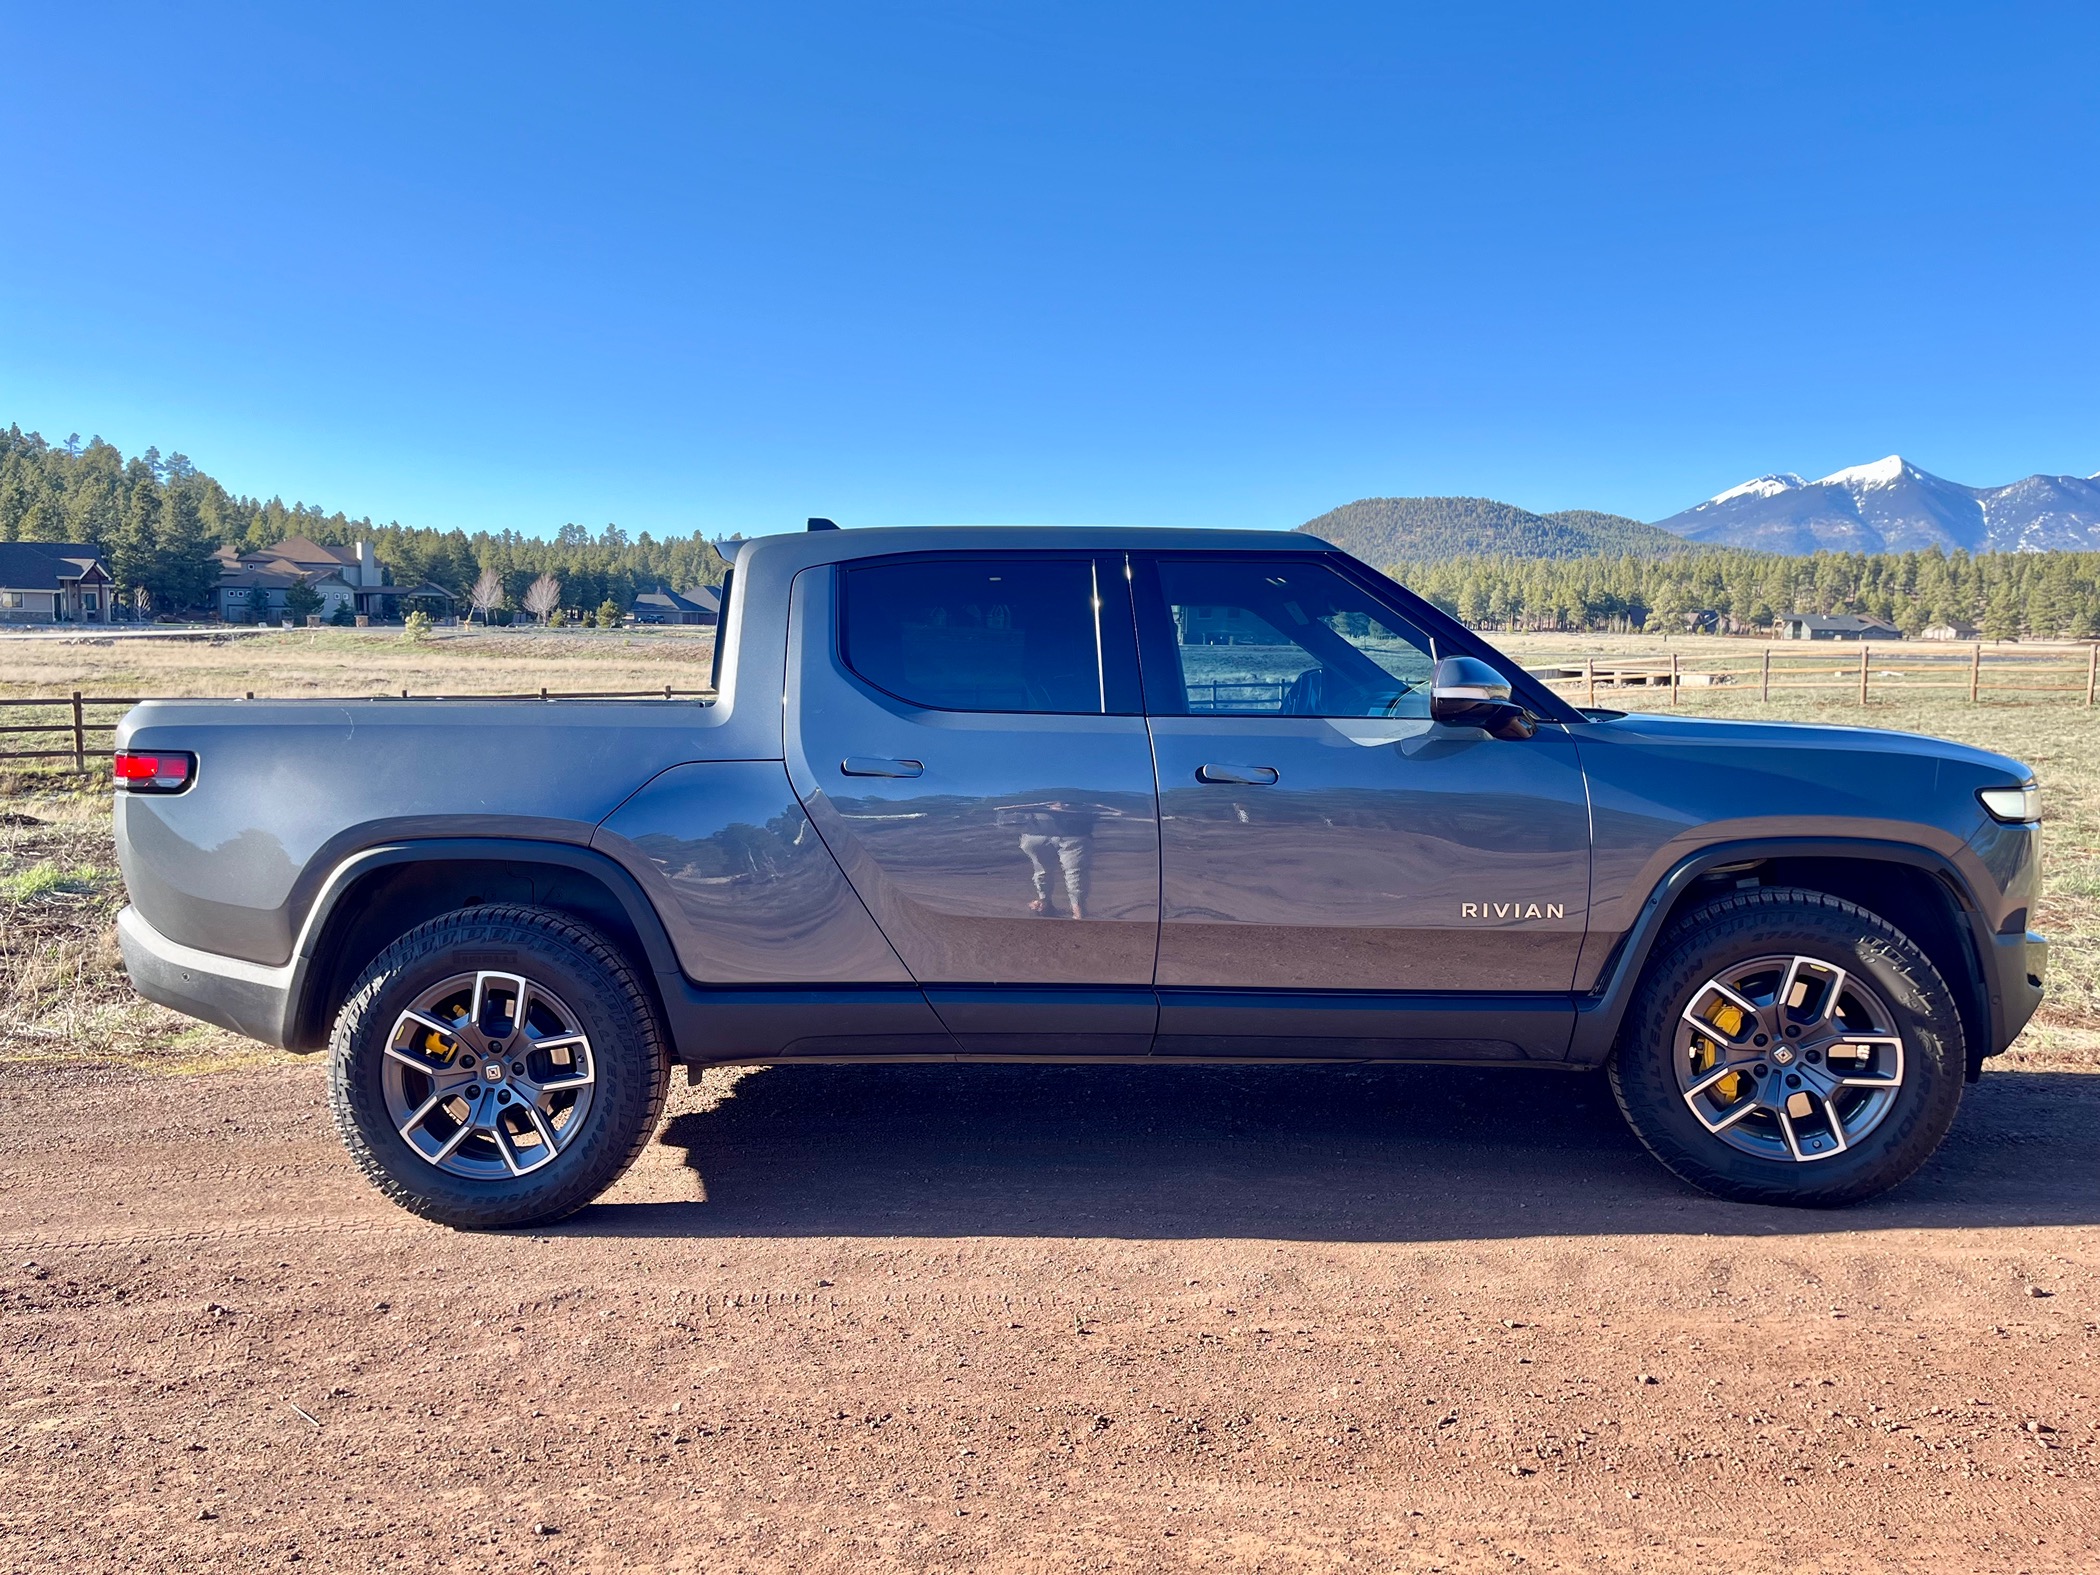 Rivian R1T R1S FOR SALE: 22 R1T LE - El Cap - Quad Motor - Lrg Pack - 20" AT - 39k mi - Off Road Pkg - Lots of Accessories and Aftermarket Upgrades - $60K IMG_6884